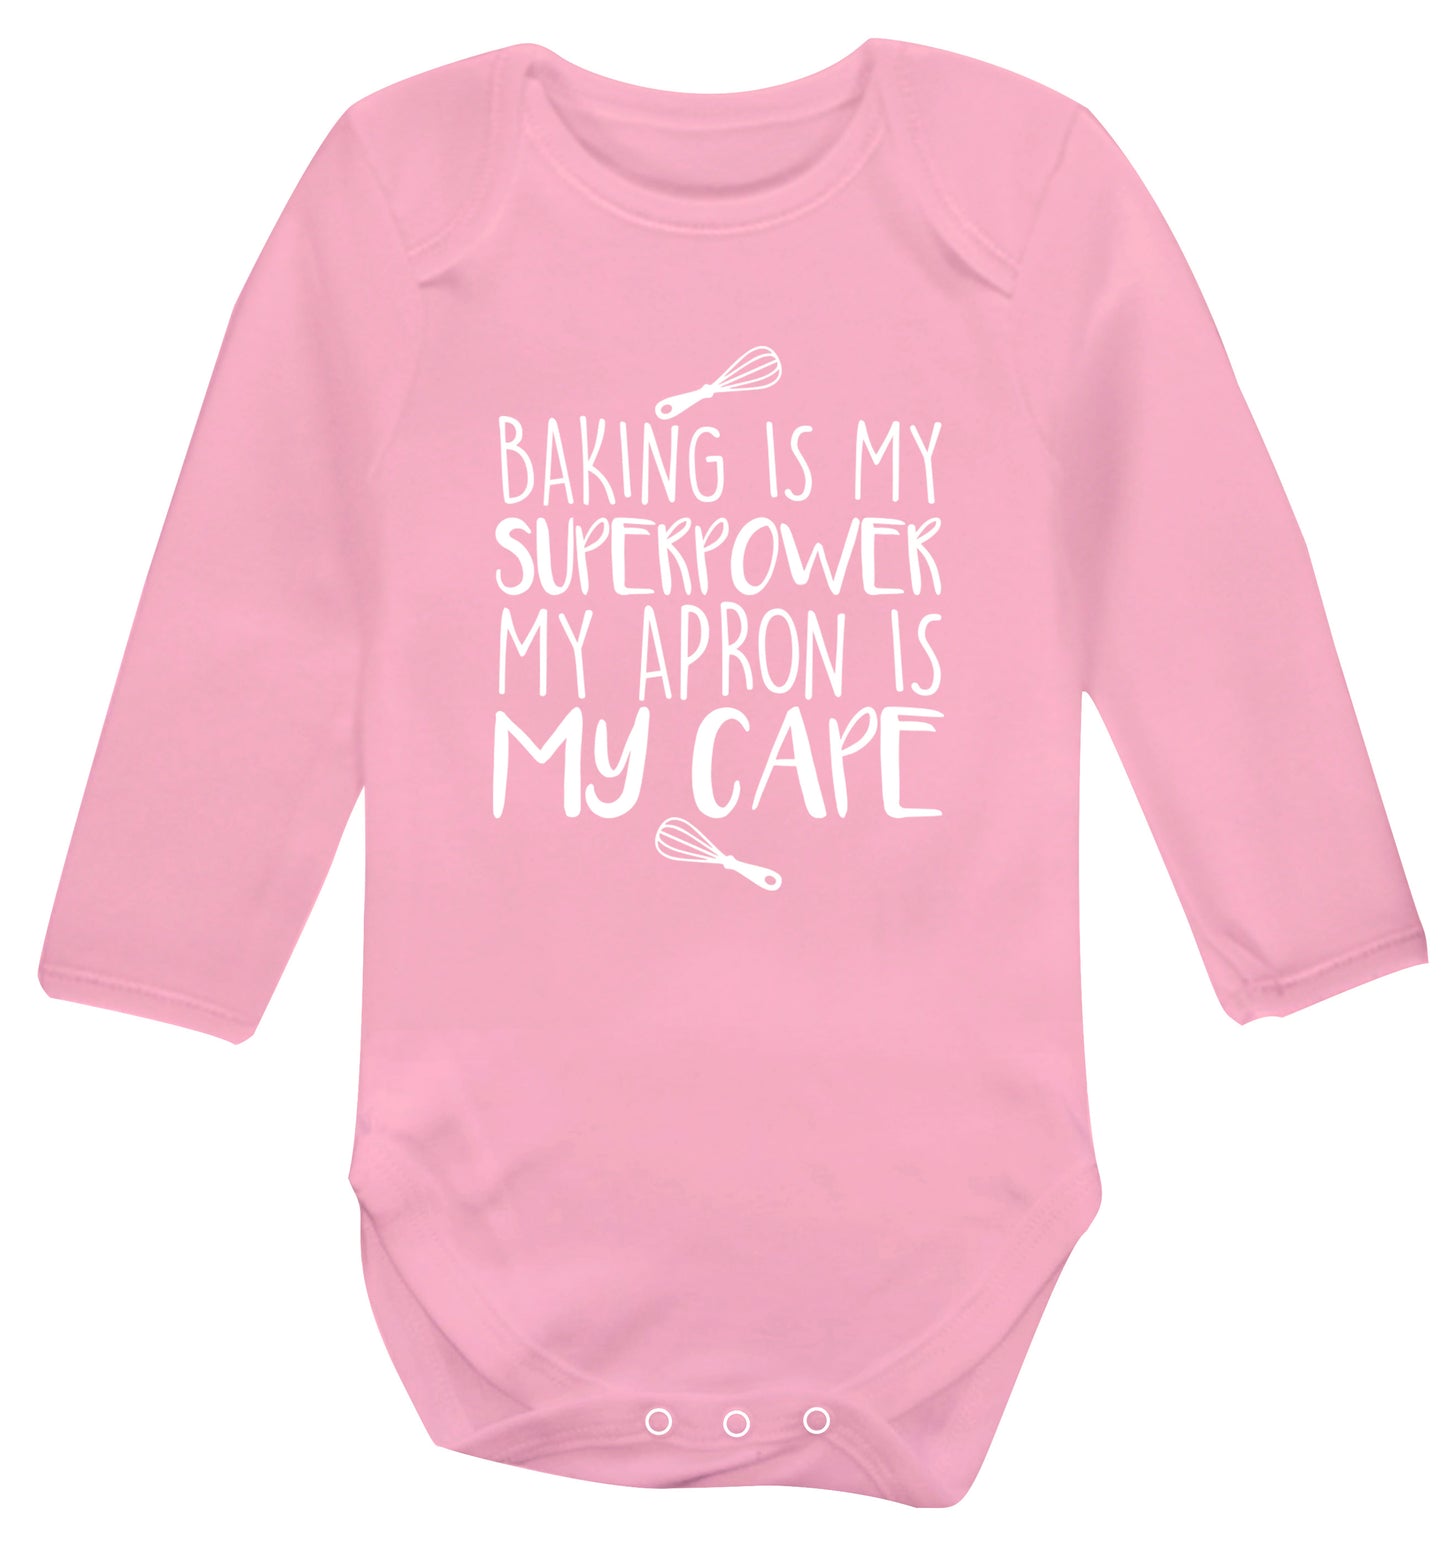 Baking is my superpower my apron is my cape Baby Vest long sleeved pale pink 6-12 months